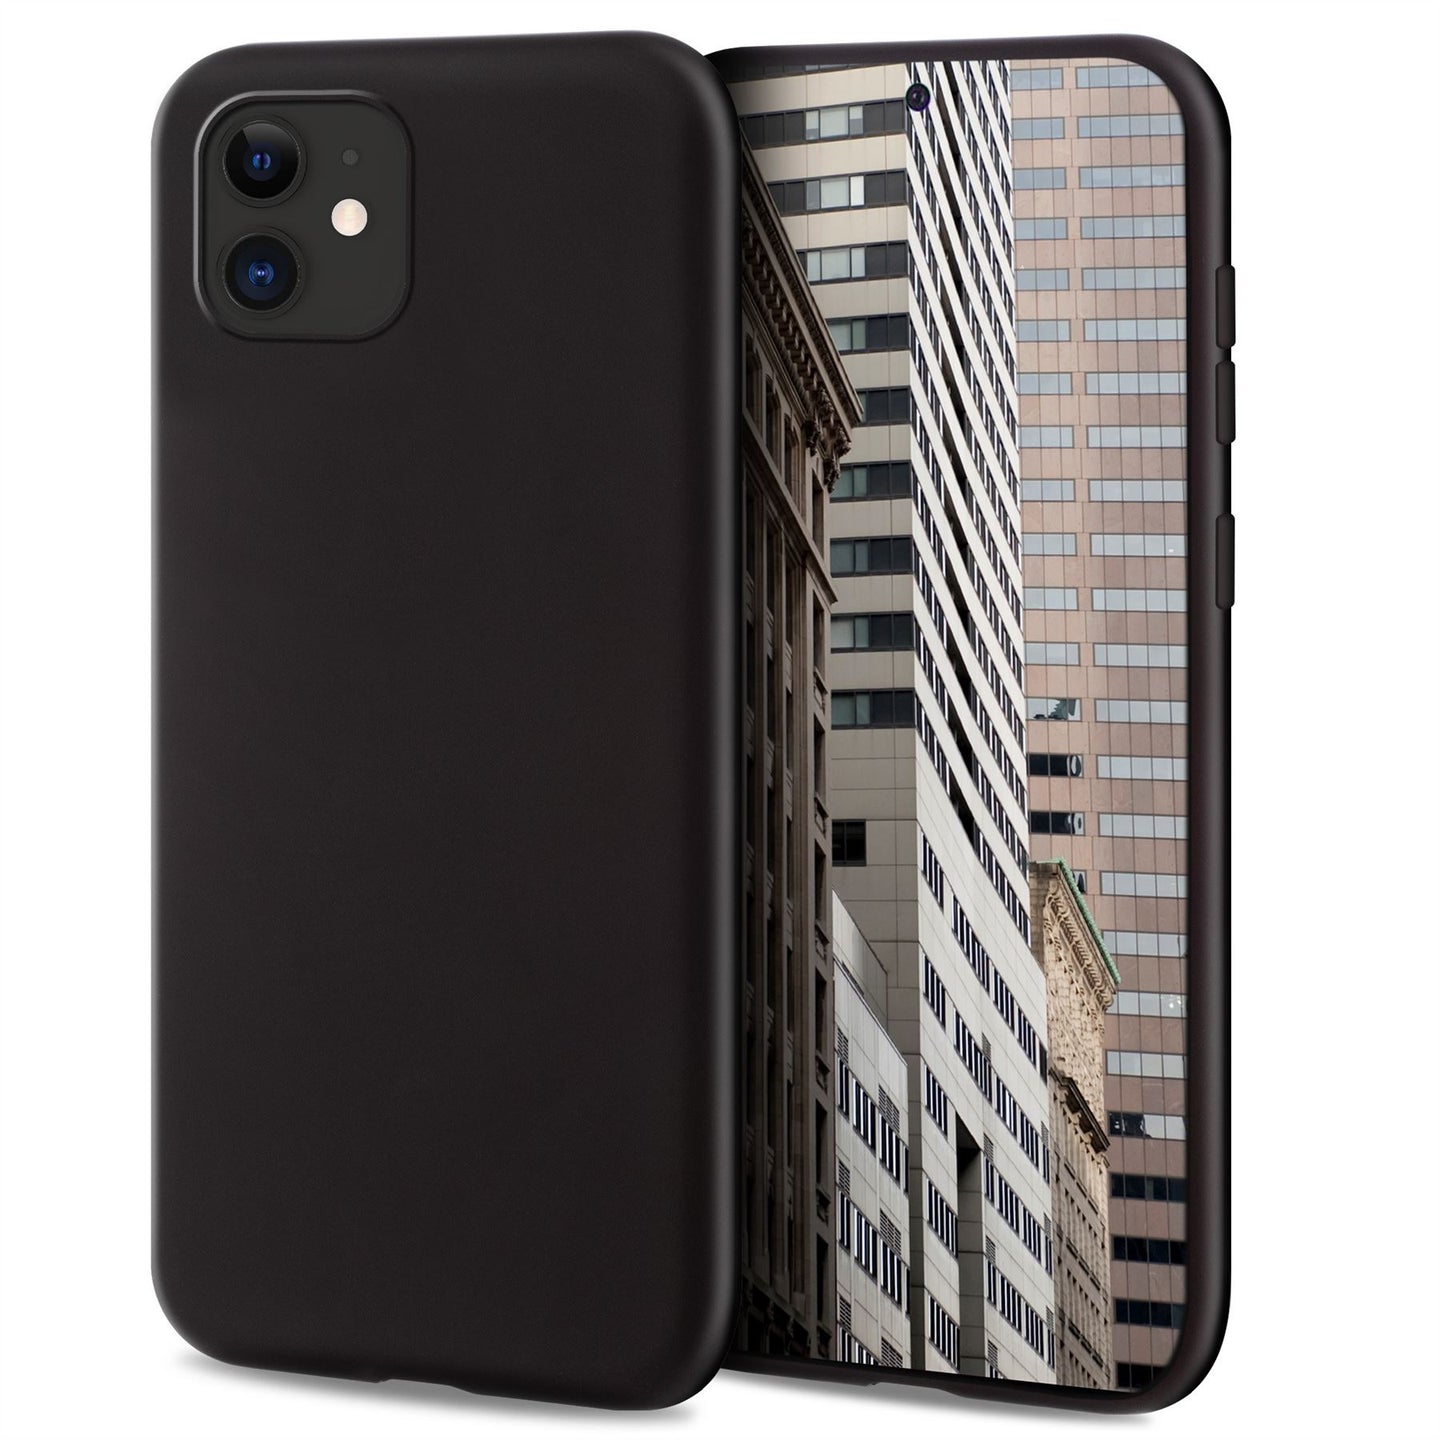 Moozy Lifestyle. Designed for iPhone 11 Case, Black - Liquid Silicone Cover with Matte Finish and Soft Microfiber Lining